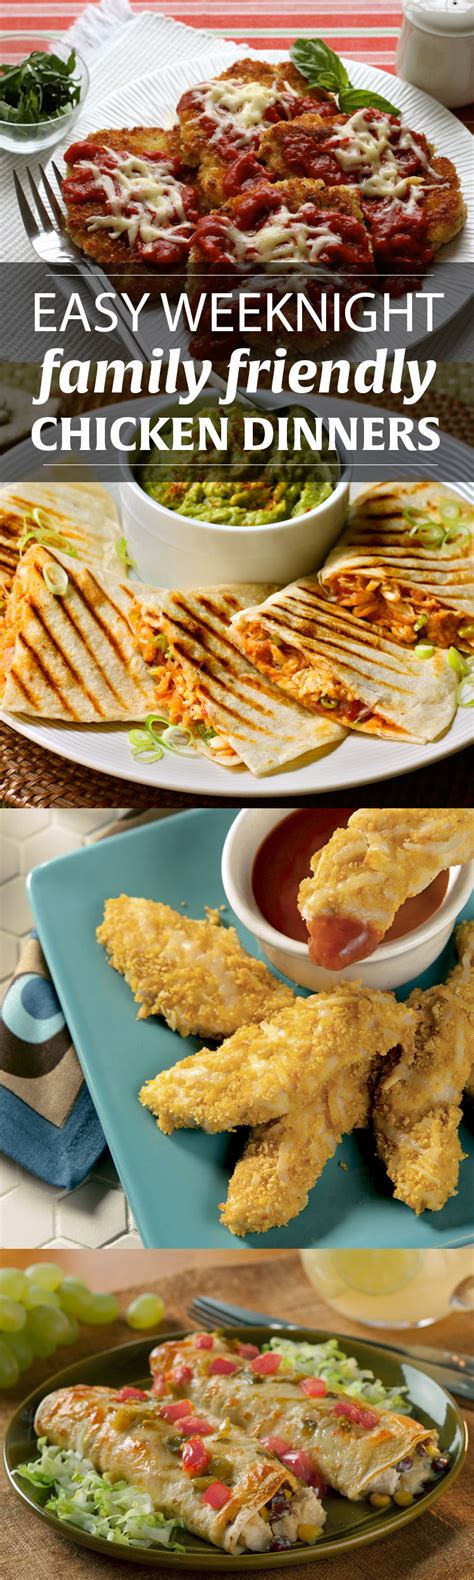 Easy Weeknight Chicken Dinners for the Family | Chicken ...